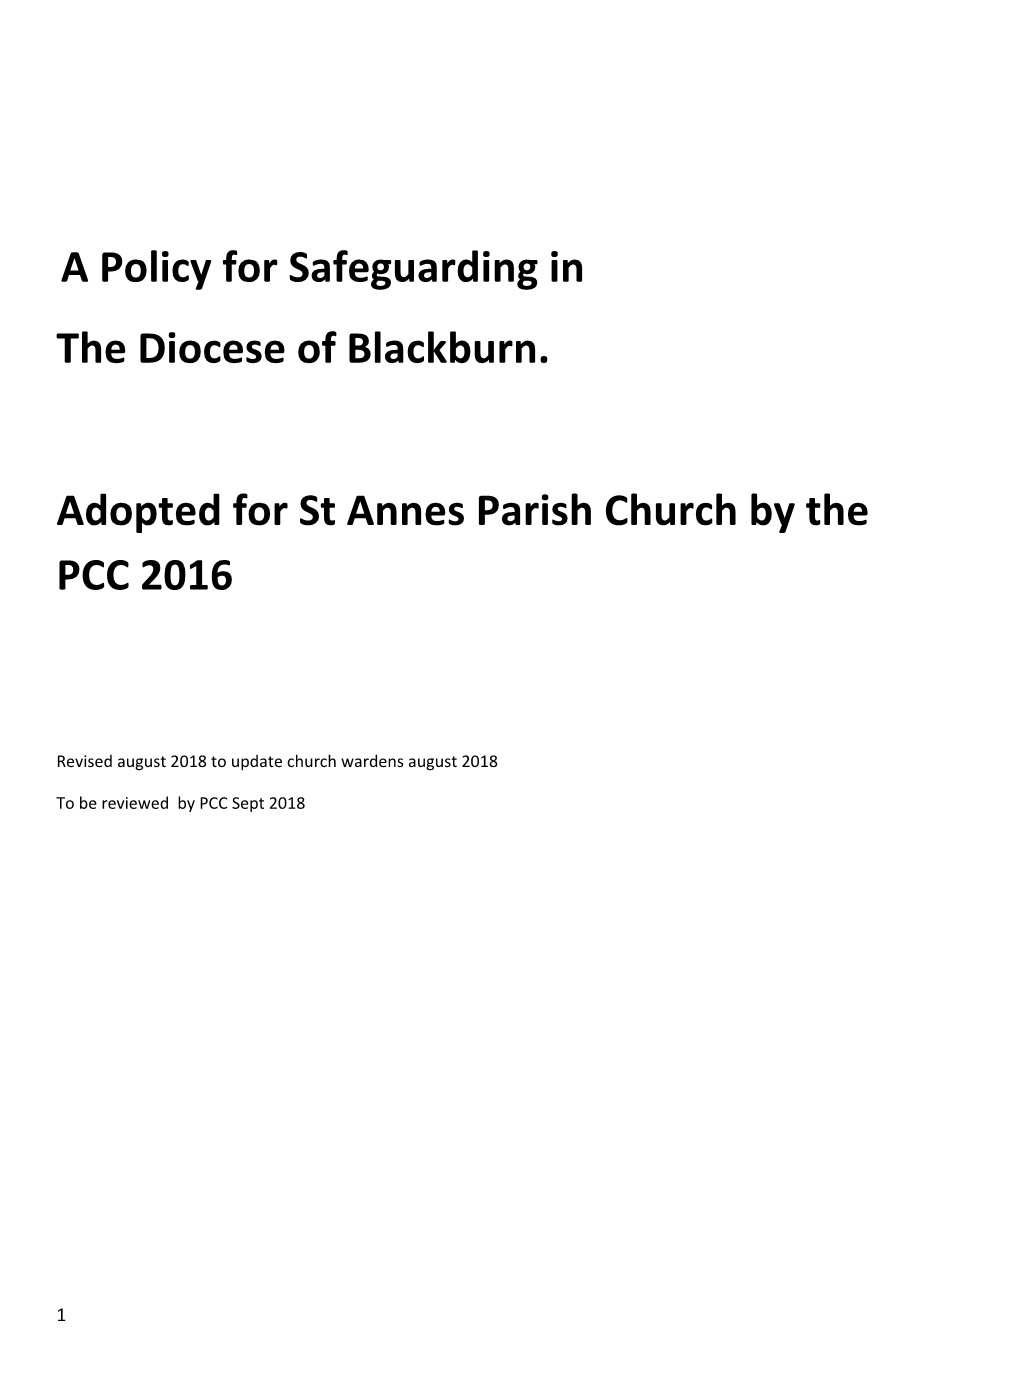 Adopted for St Annes Parish Church by the PCC 2016